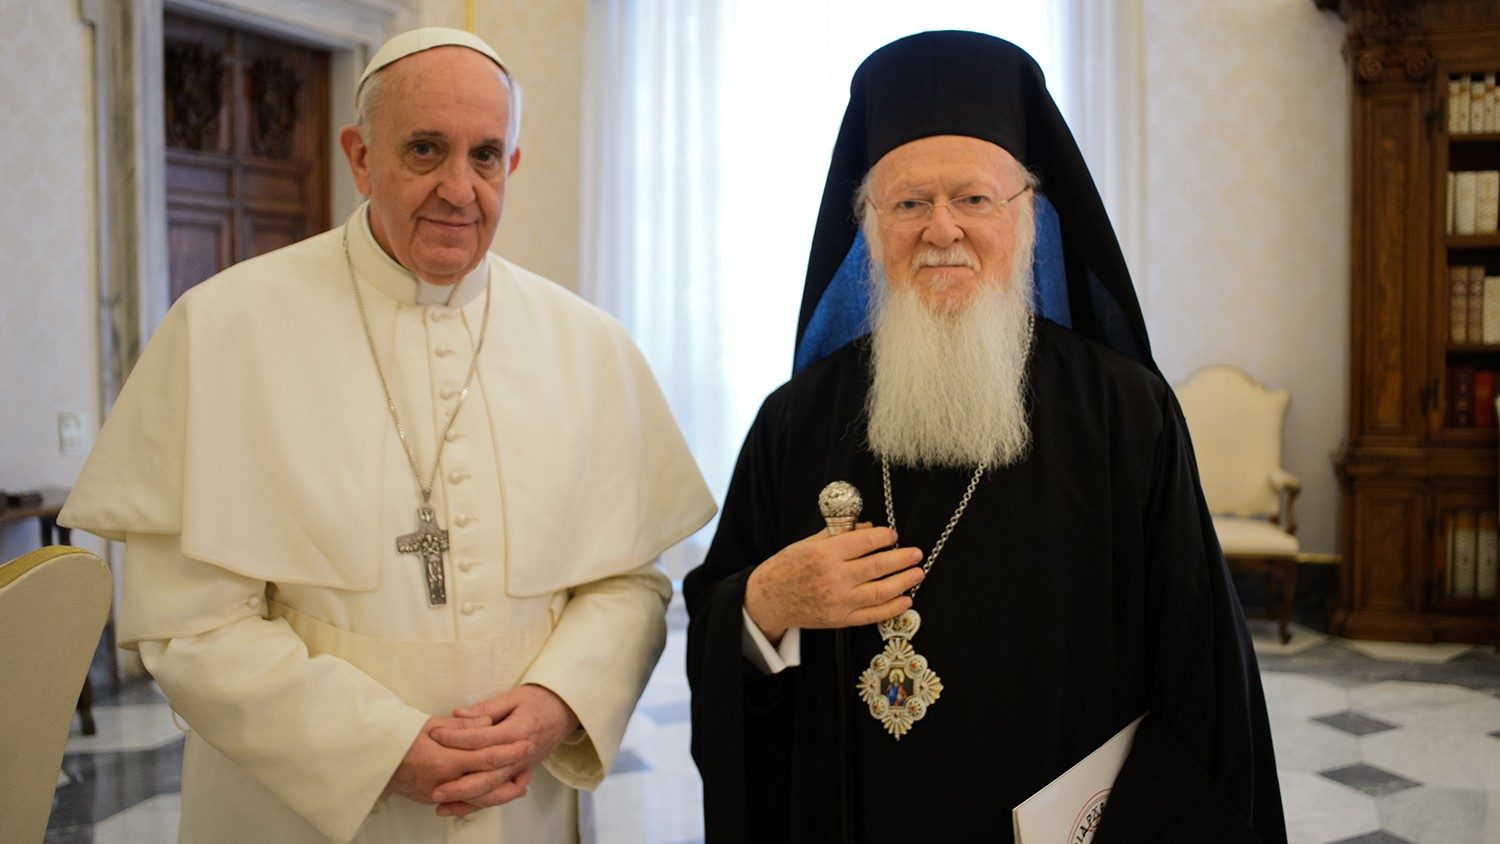 Patriarch Bartholomew: The gift of the relics is a crucial step - Vatican  News